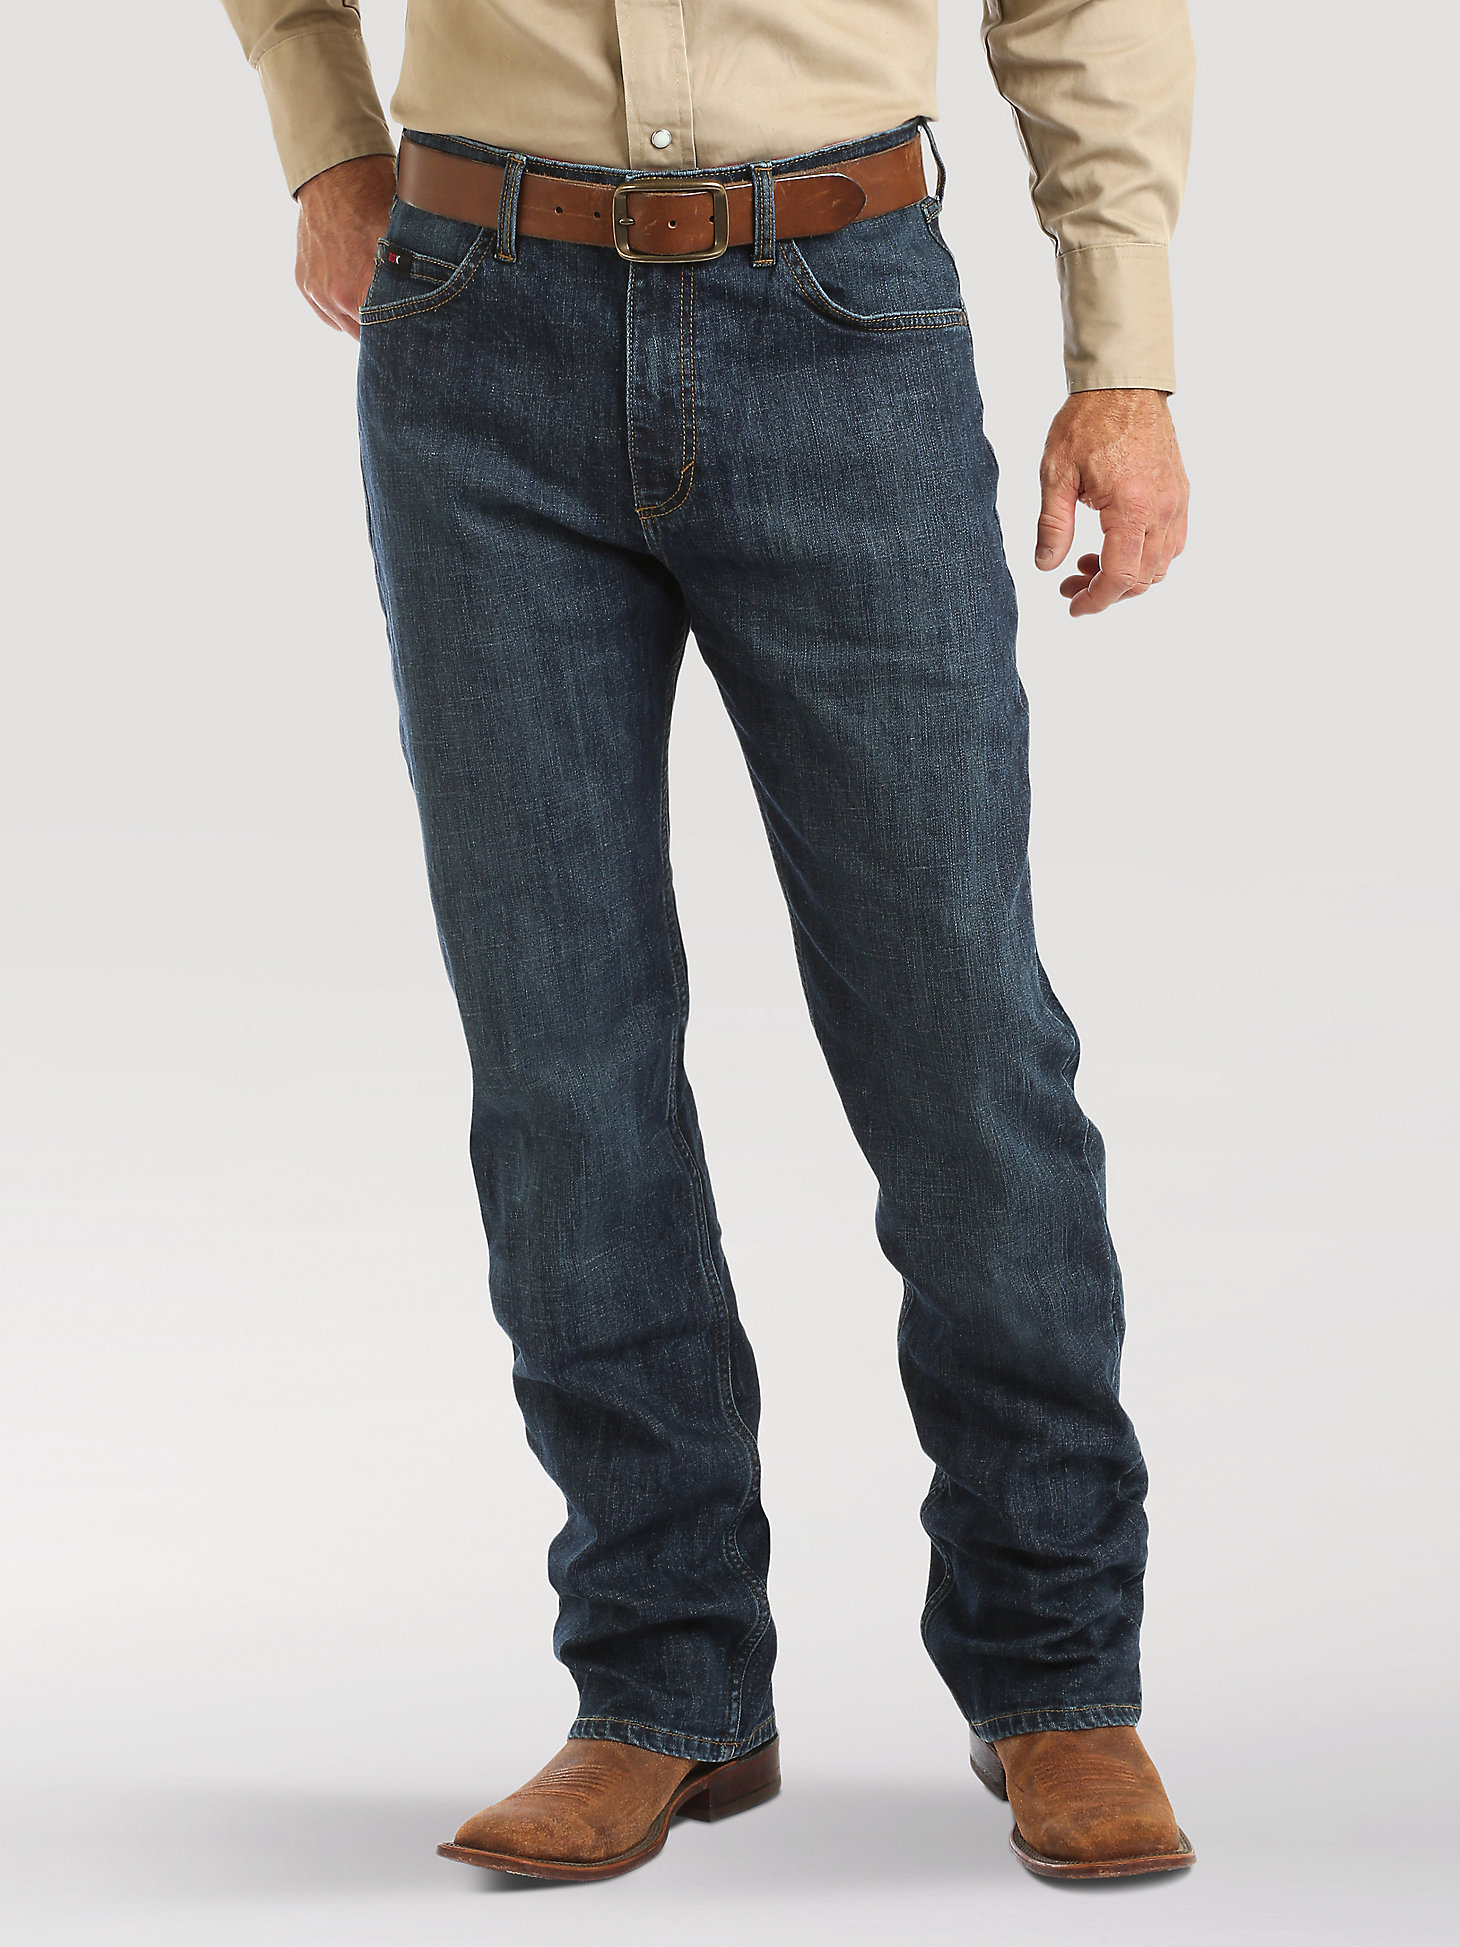 Men's Wrangler® 20X® Active Flex Relaxed Fit Jean in Thundercloud alternative view 1